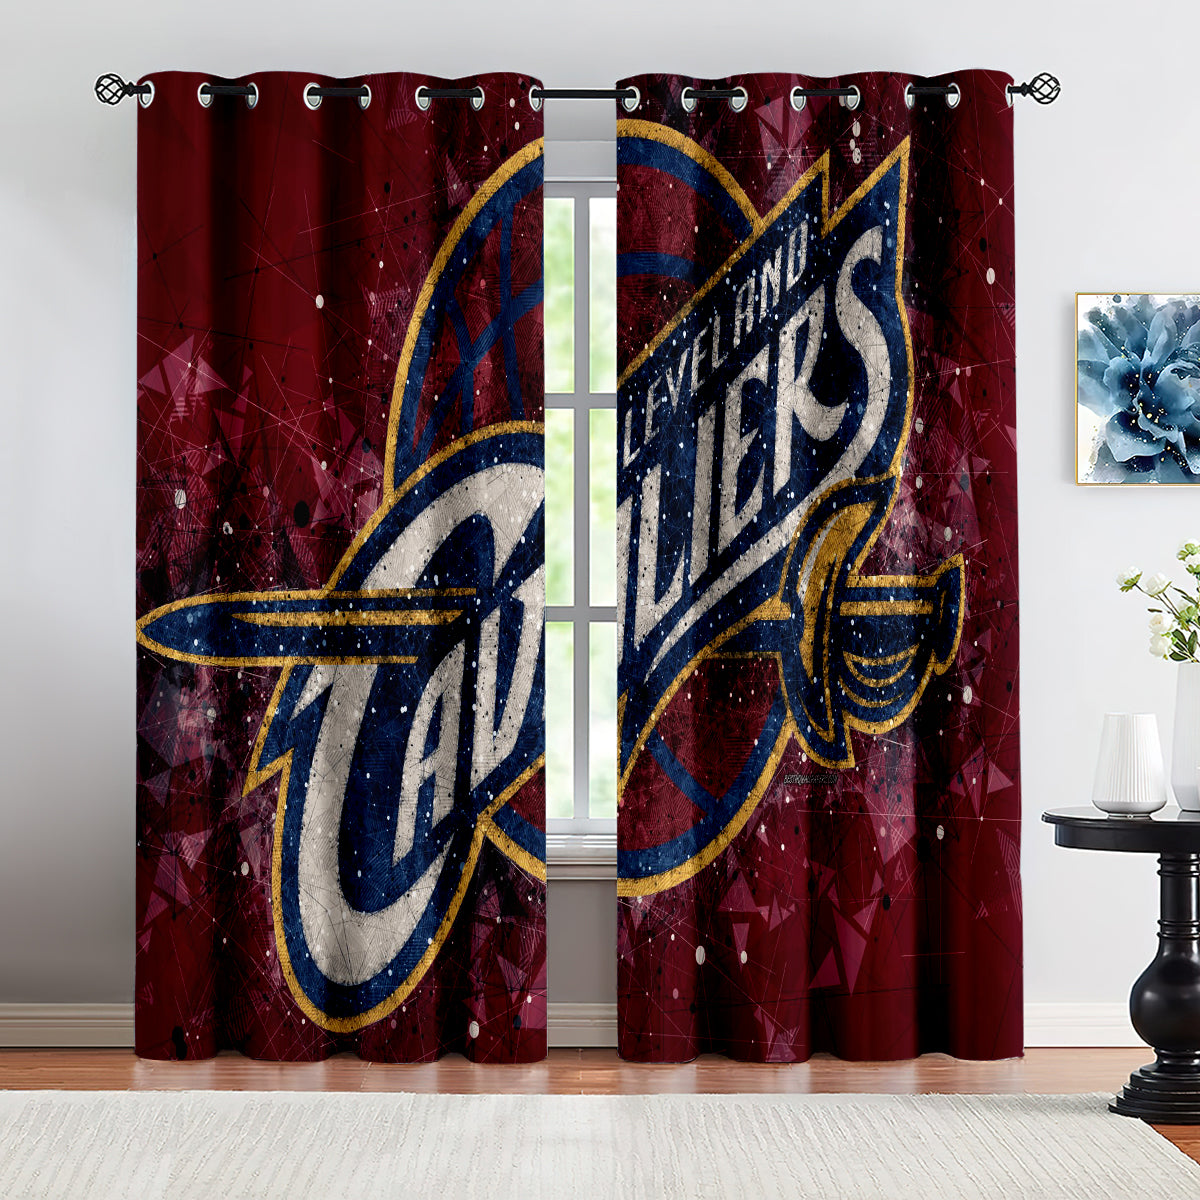 Cleveland Basketball Cavaliers Blackout Curtains Drapes For Window Treatment Set